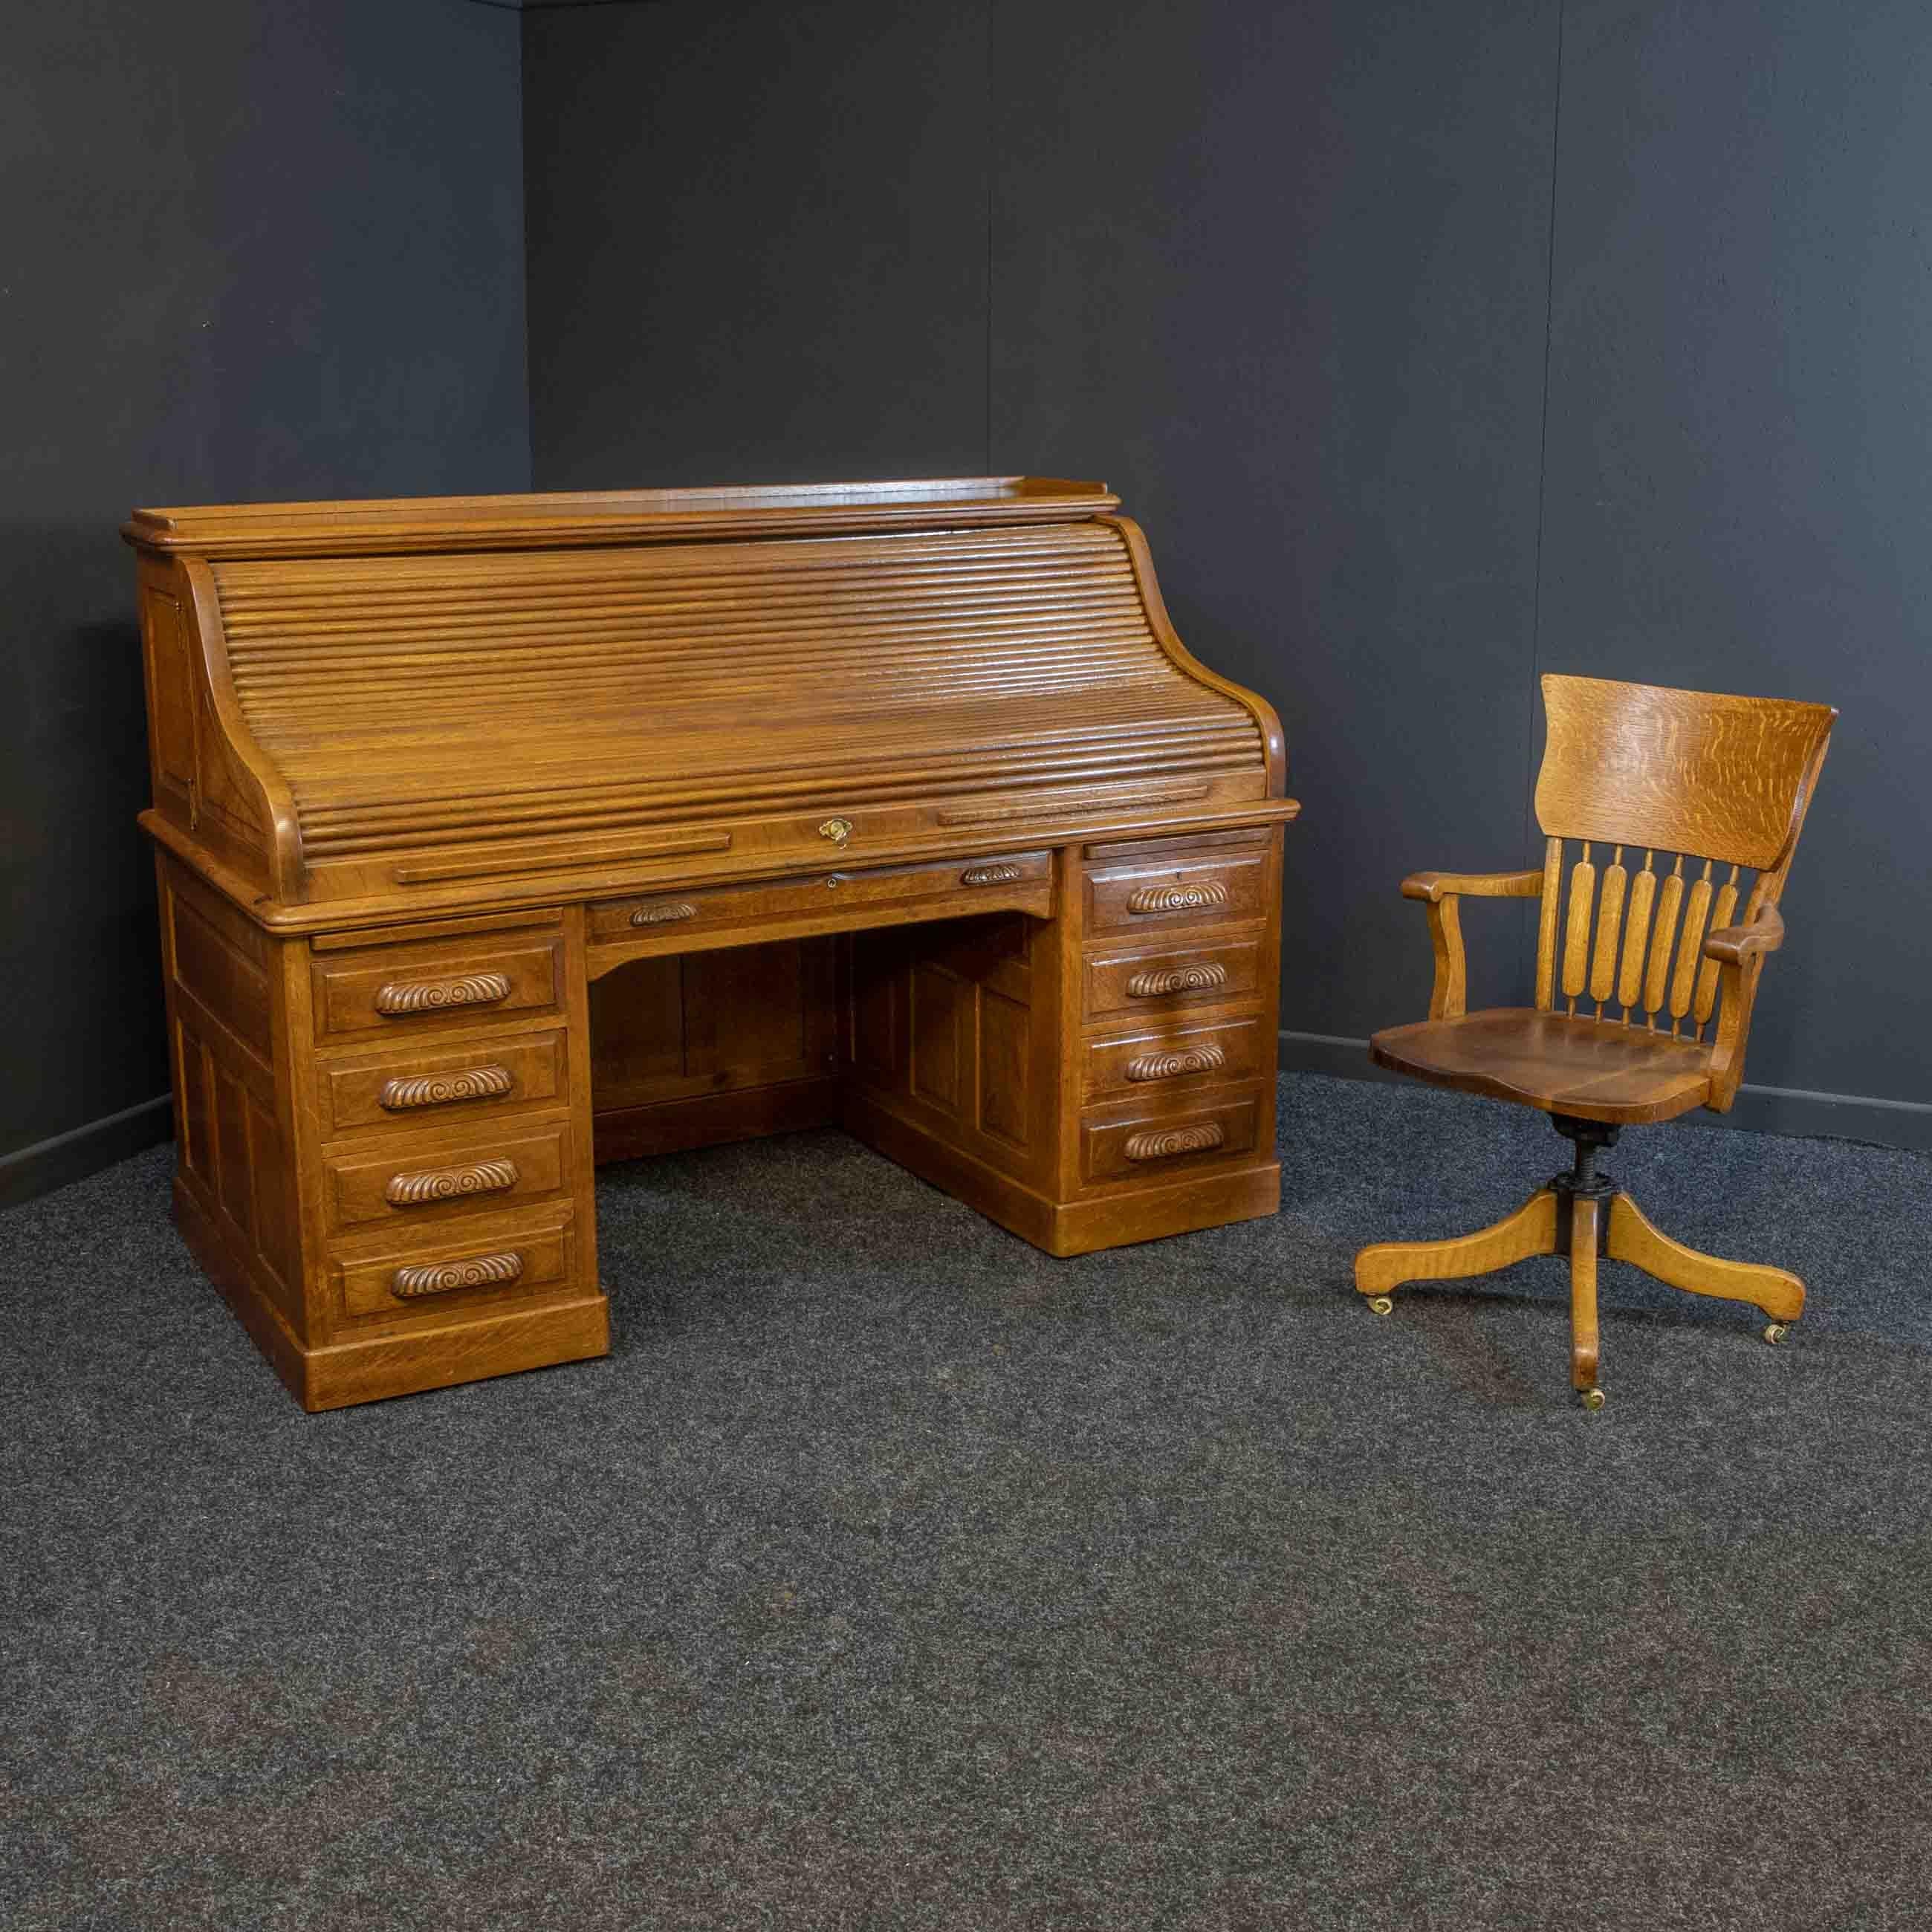 A truly magnificent golden oak roll top desk acquired from a stately home property in Scotland. Of exceptionally large proportions and absolutely top of the range in quality as you would expect of titled landed gentry. The fully fitted interior